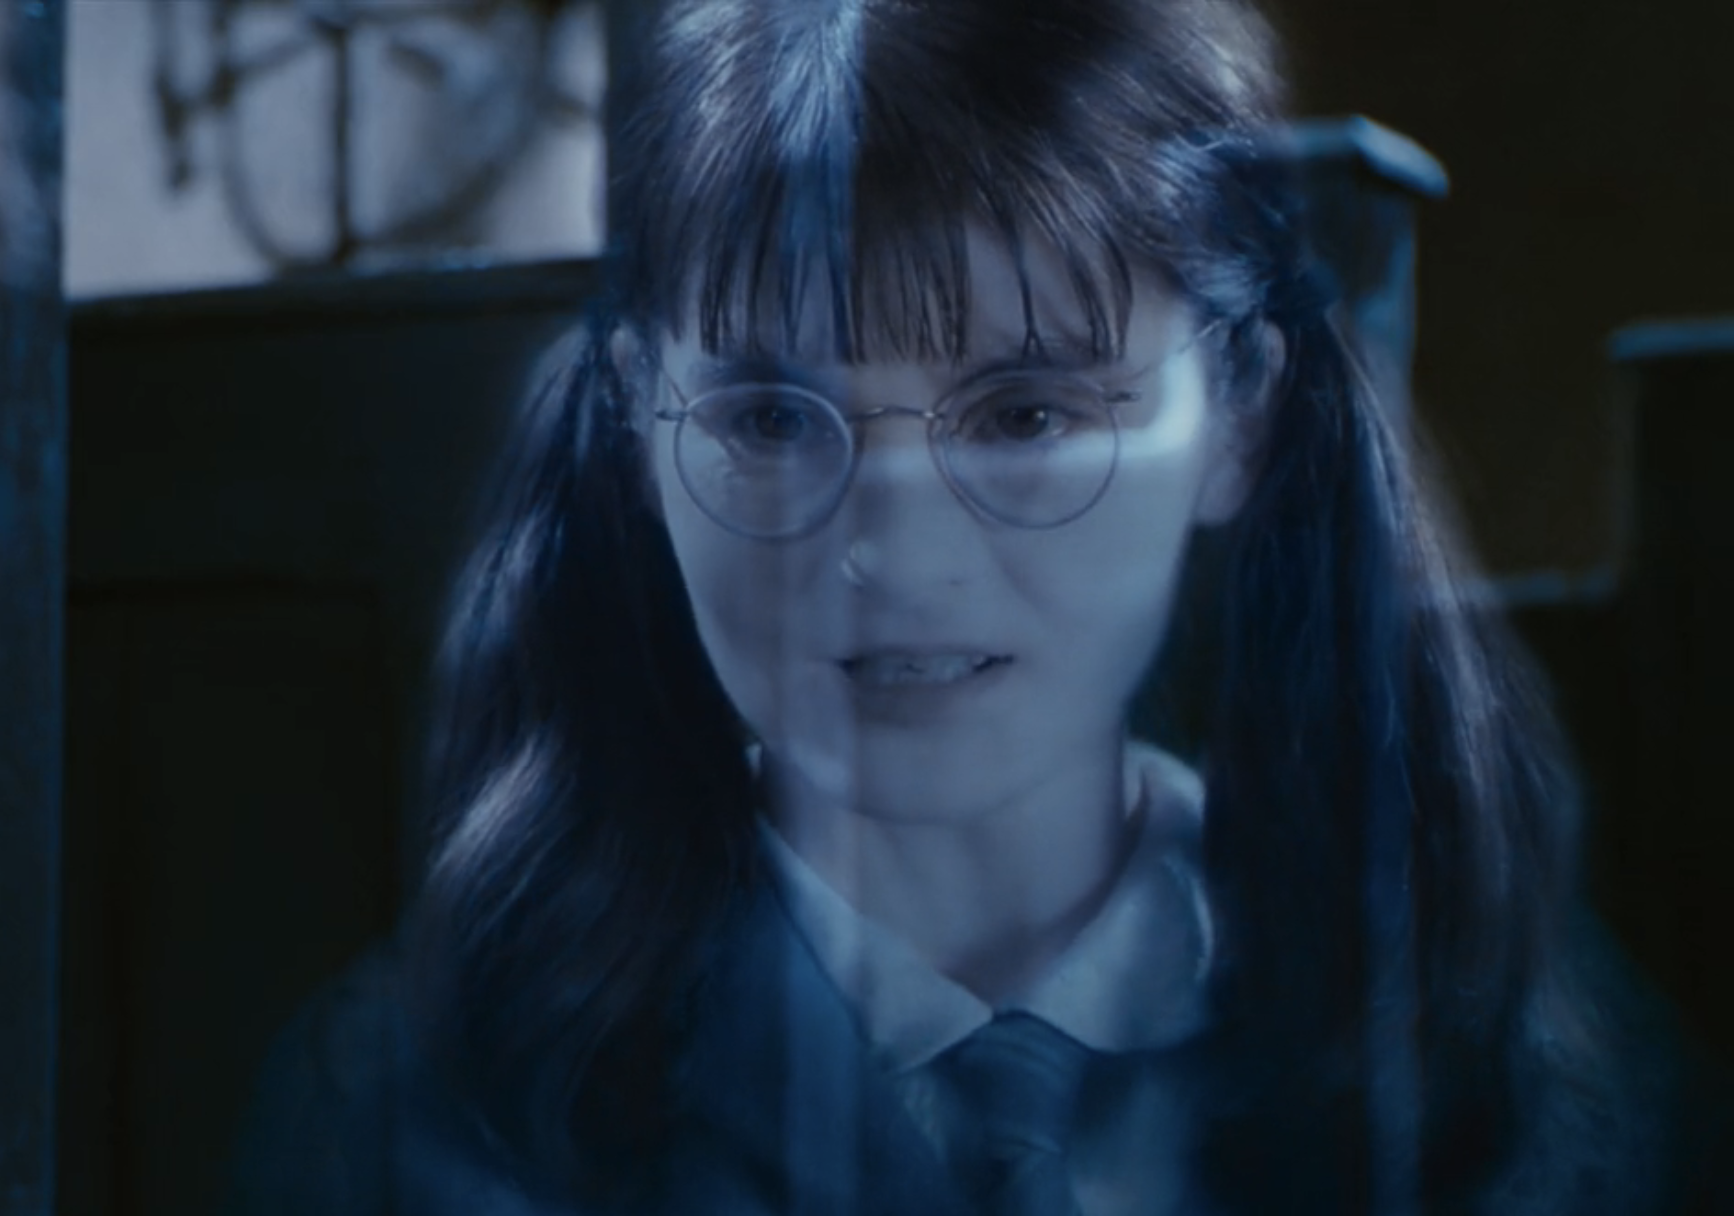 Moaning Myrtle from Harry Potter, wearing Hogwarts robes and glasses